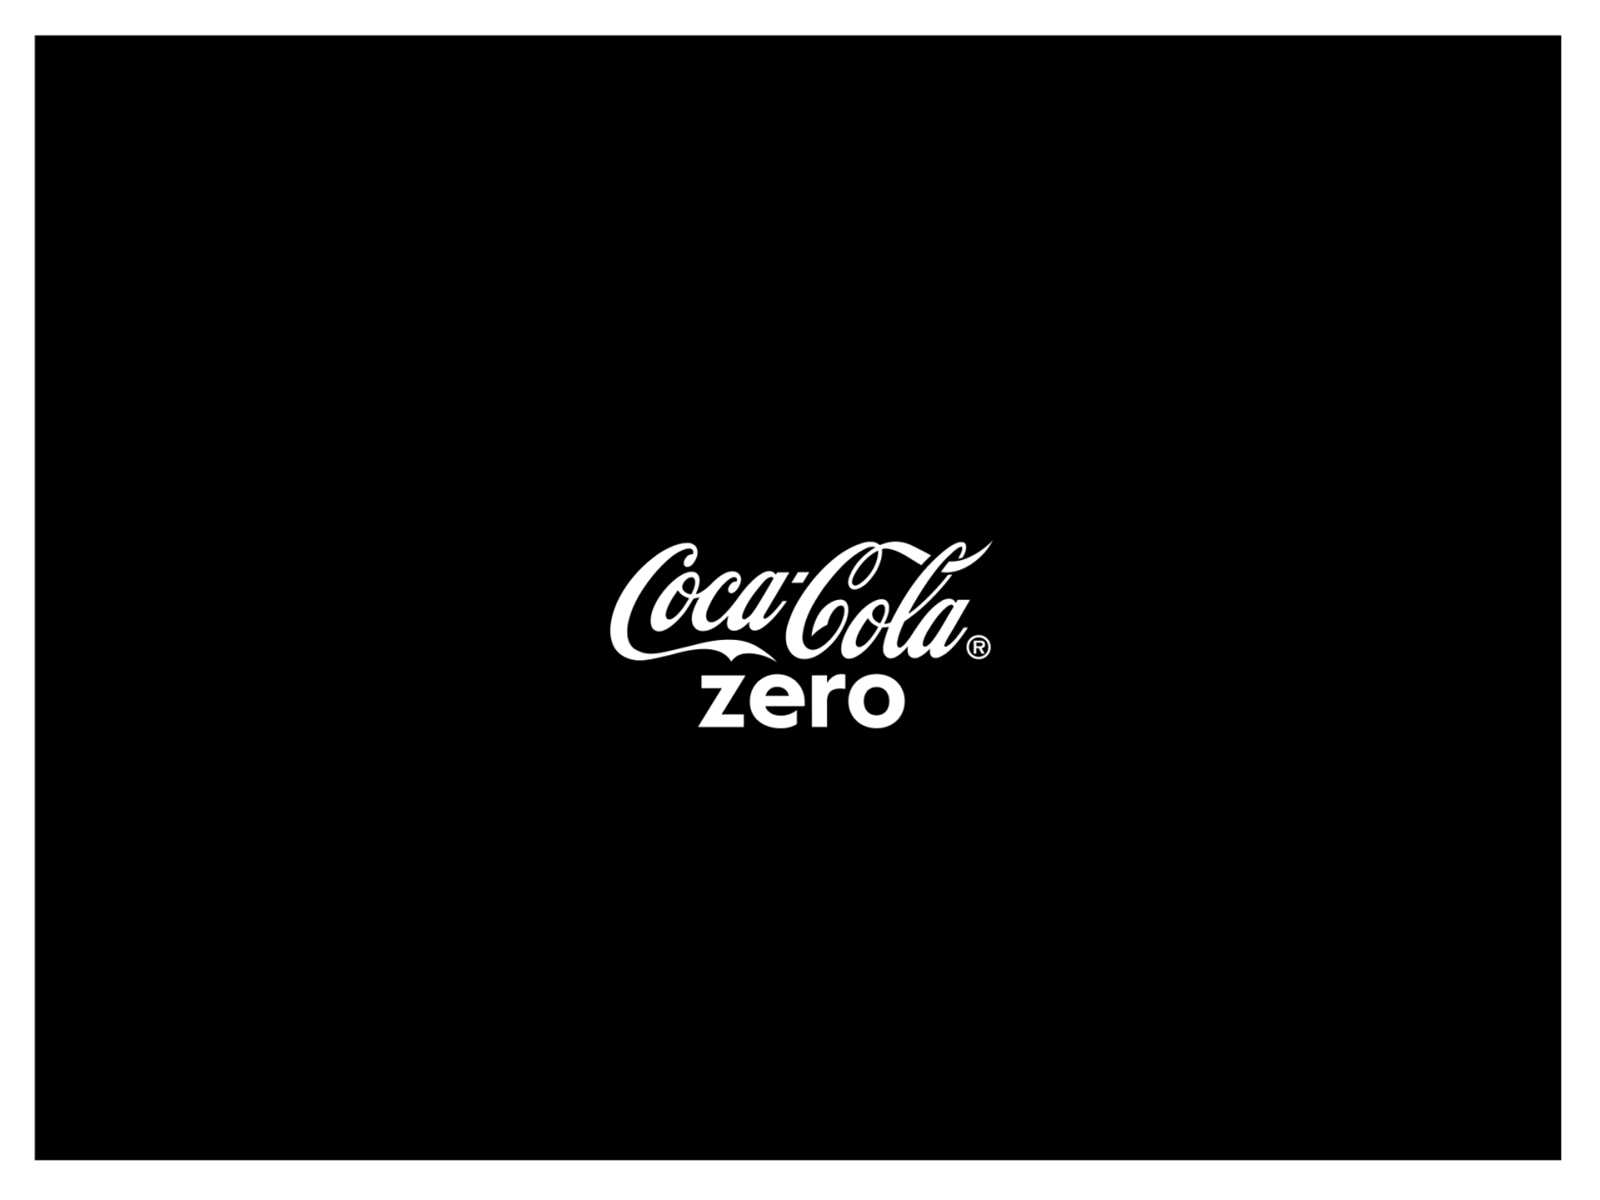 CocaCola zero aftereffects animation black cocacola coke gif idea illustration juice learning love mograph new red shot spinning test vector vector art zero